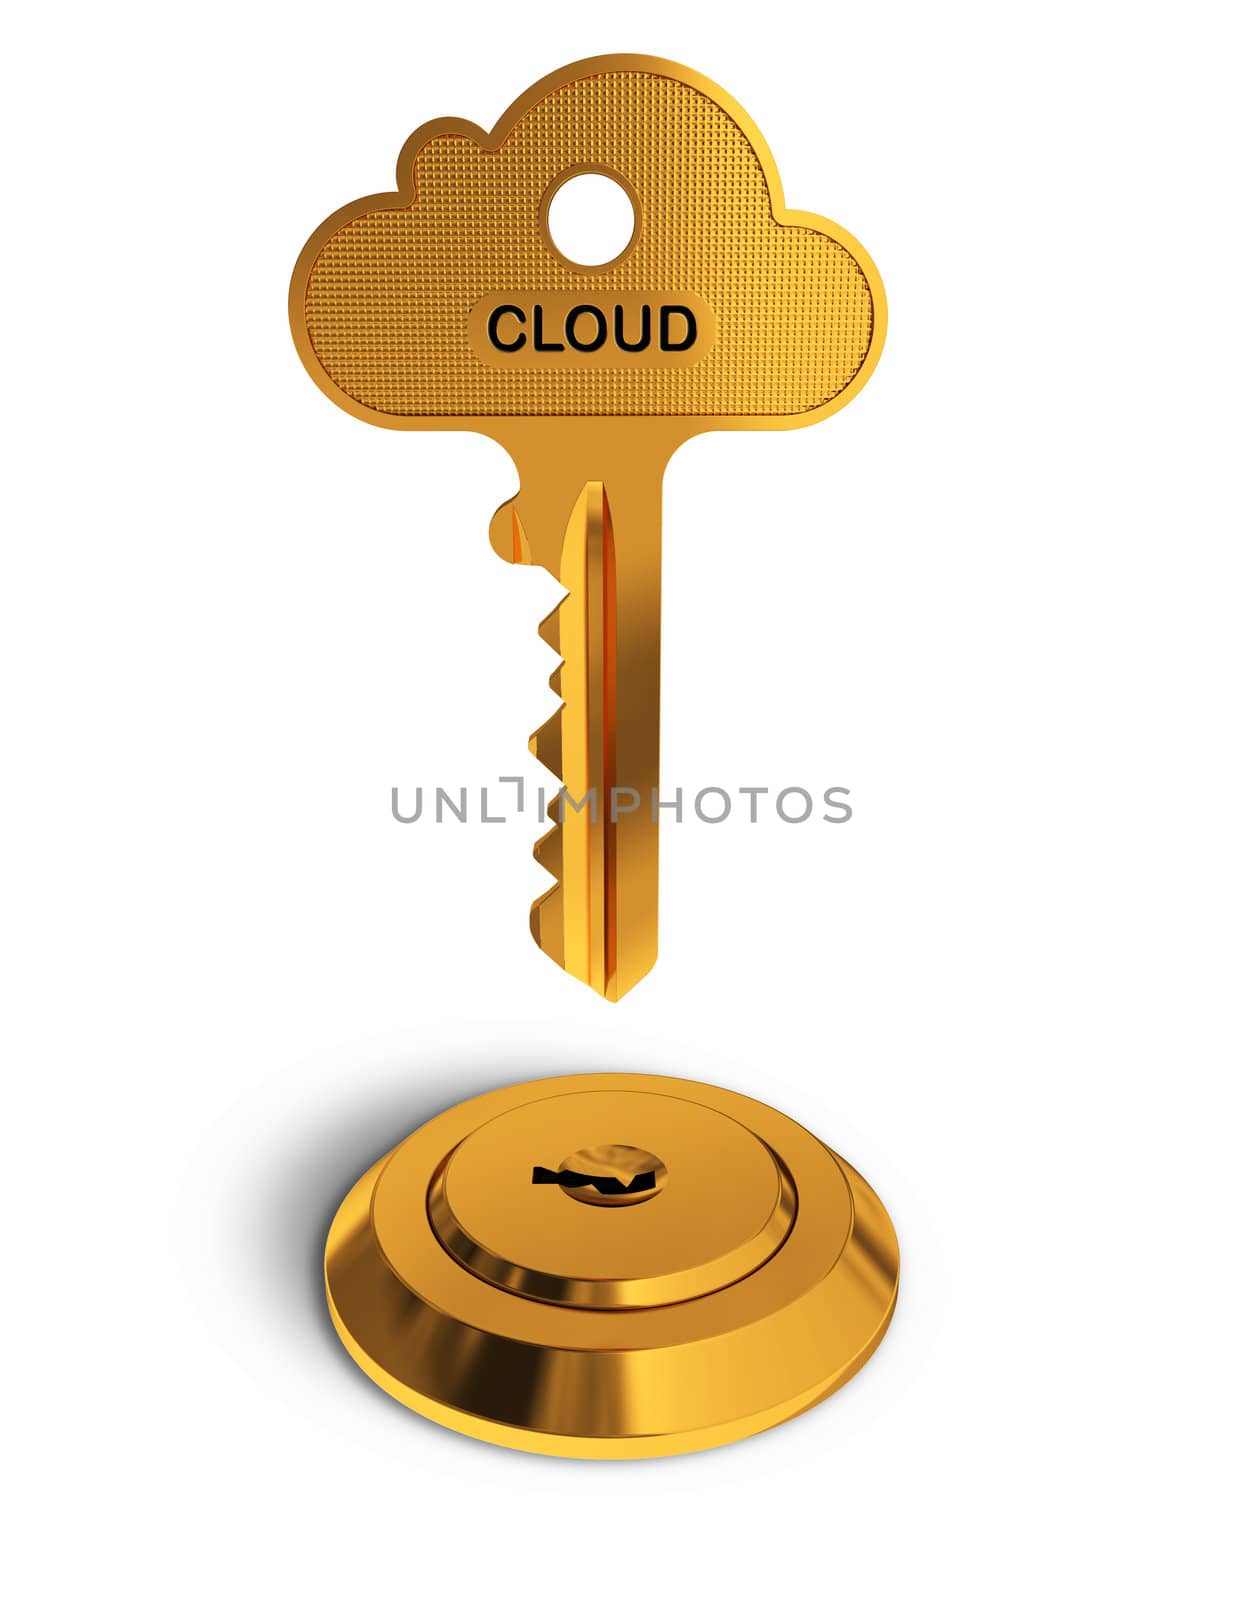 Cloud gold key on white  background - the shape of the key rapresent a cloud computing symbol - Conceptual image for access to new tecnologies.